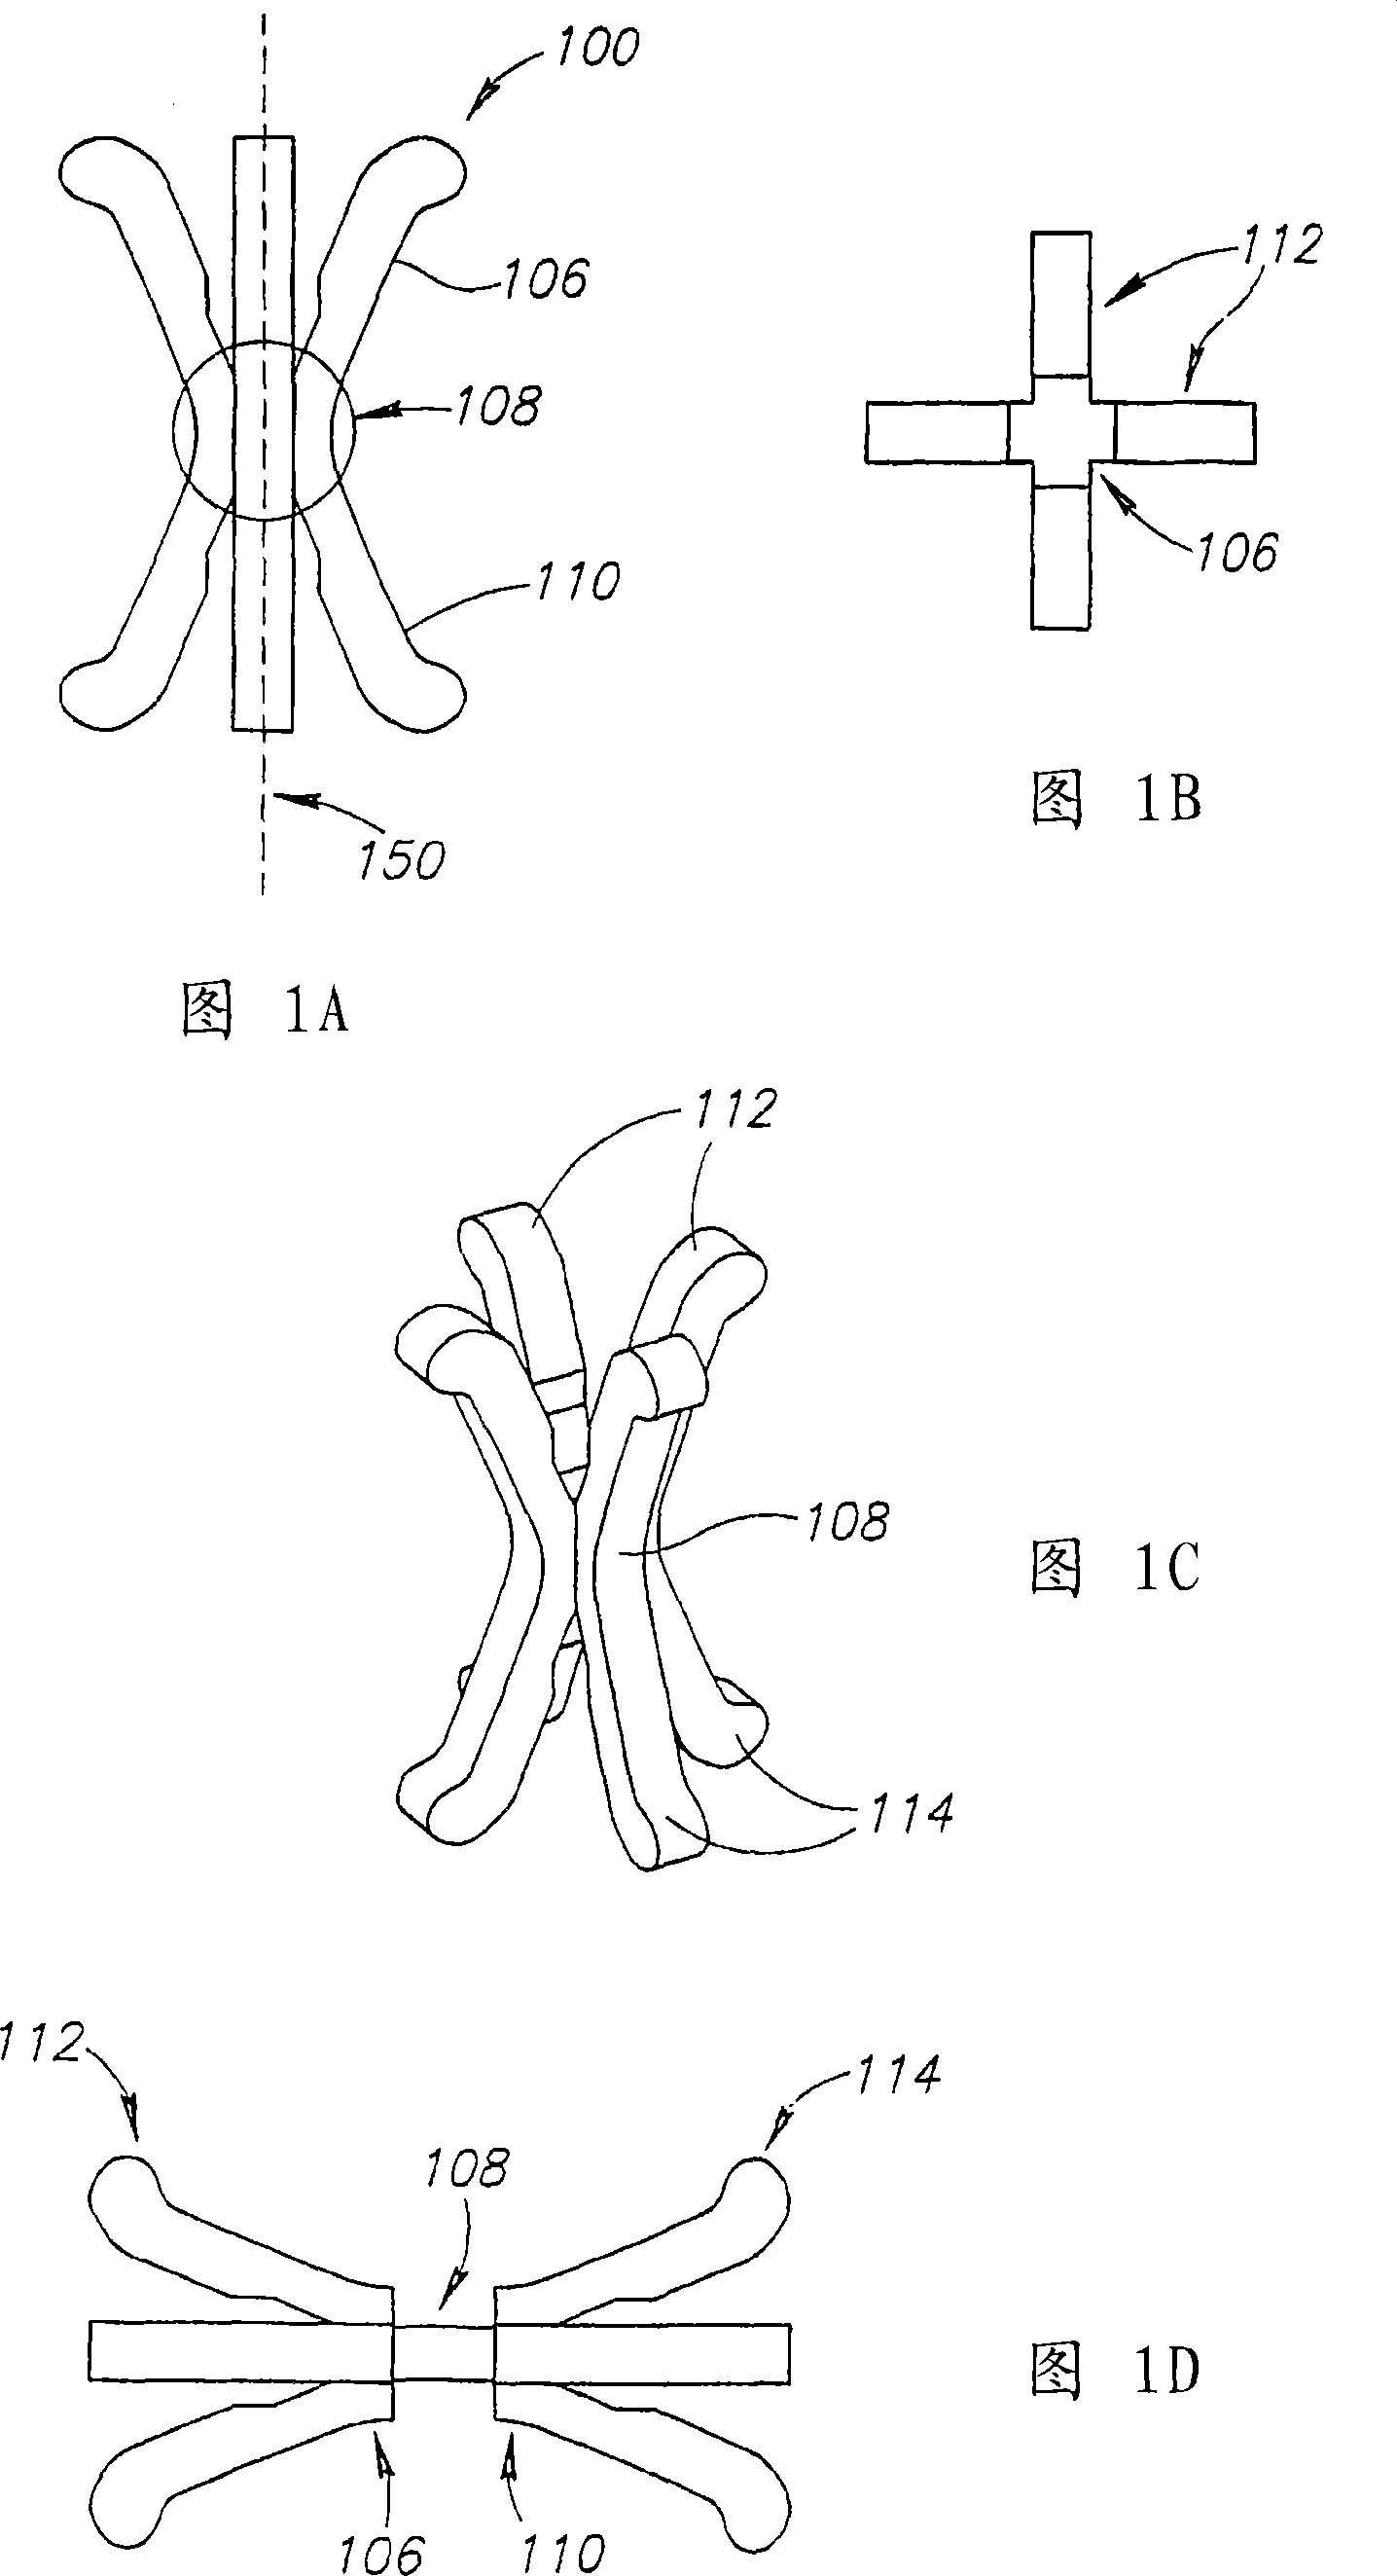 Apparatus for the prevention of urinary incontinence in females